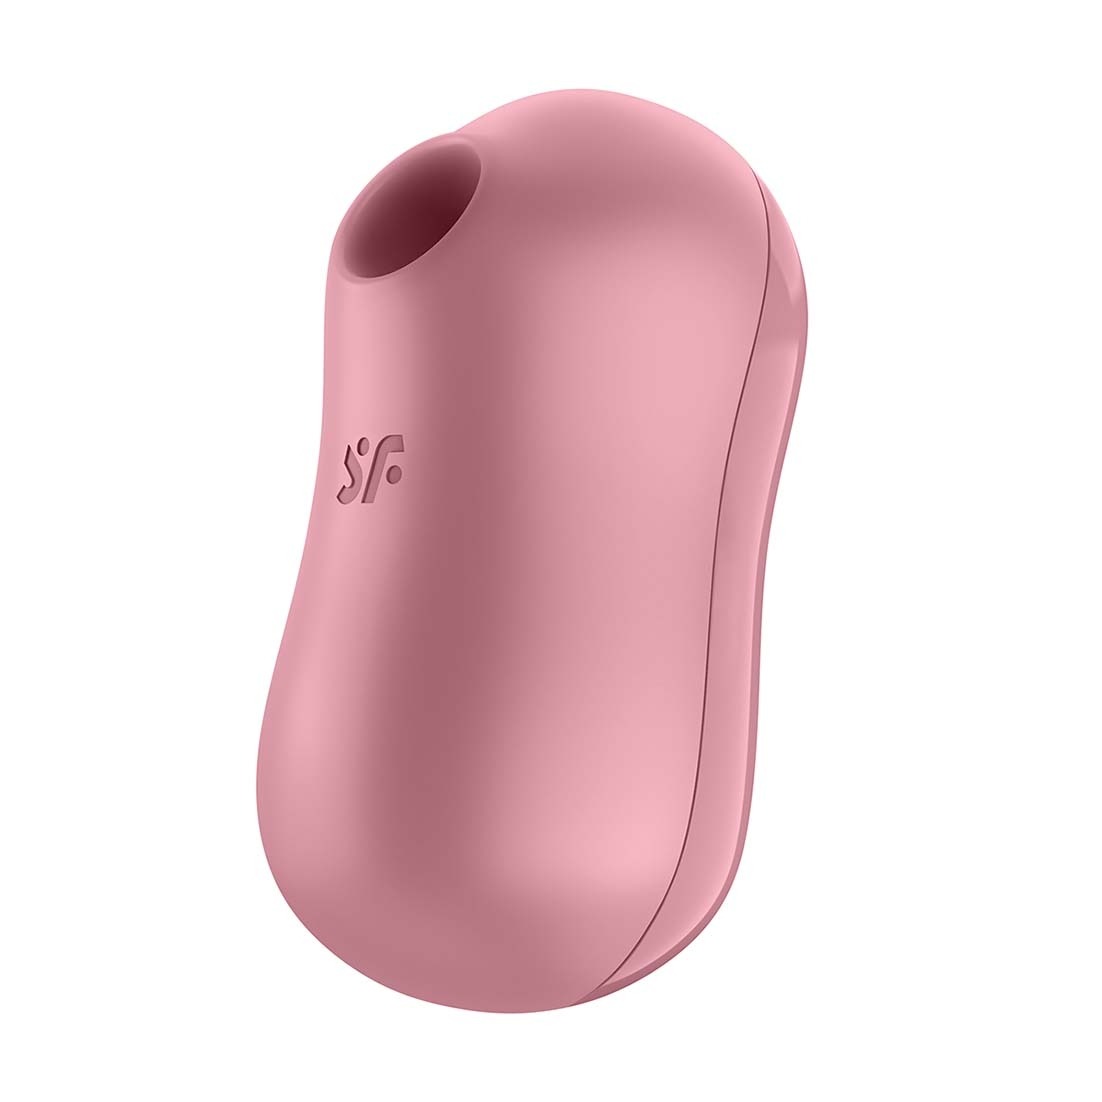 Satisfyer - Cotton Candy Double Aire Pulse Vibrator - Light Red